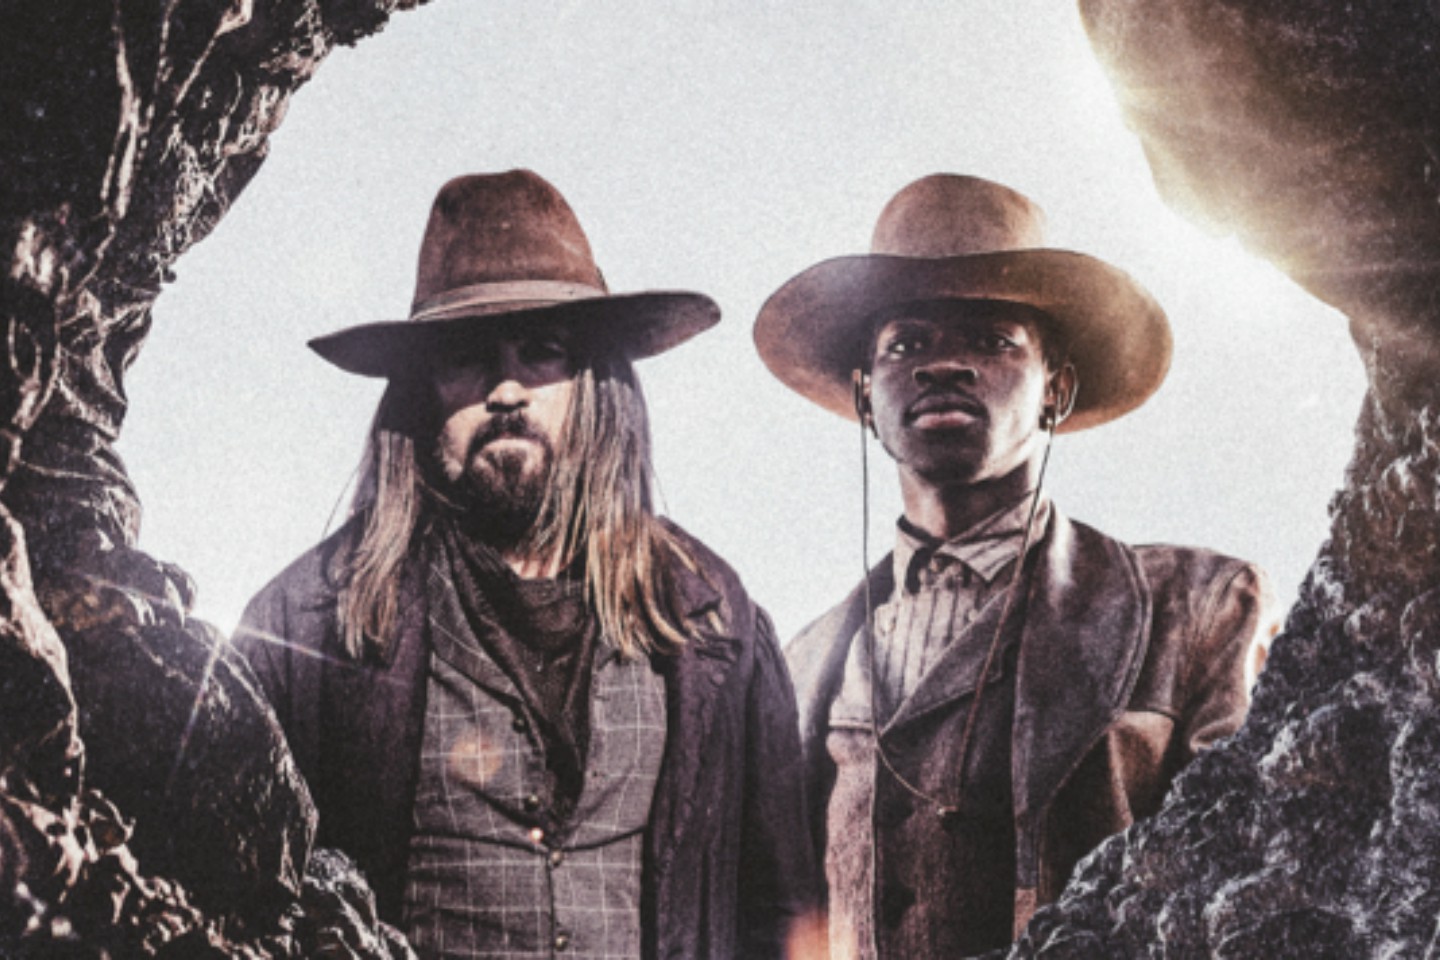 Billy cyrus old town. Old Town Road Lil nas x feat Billy ray. Old Town Road Брэд Питт. Billy ray Cyrus x Lil nas x.